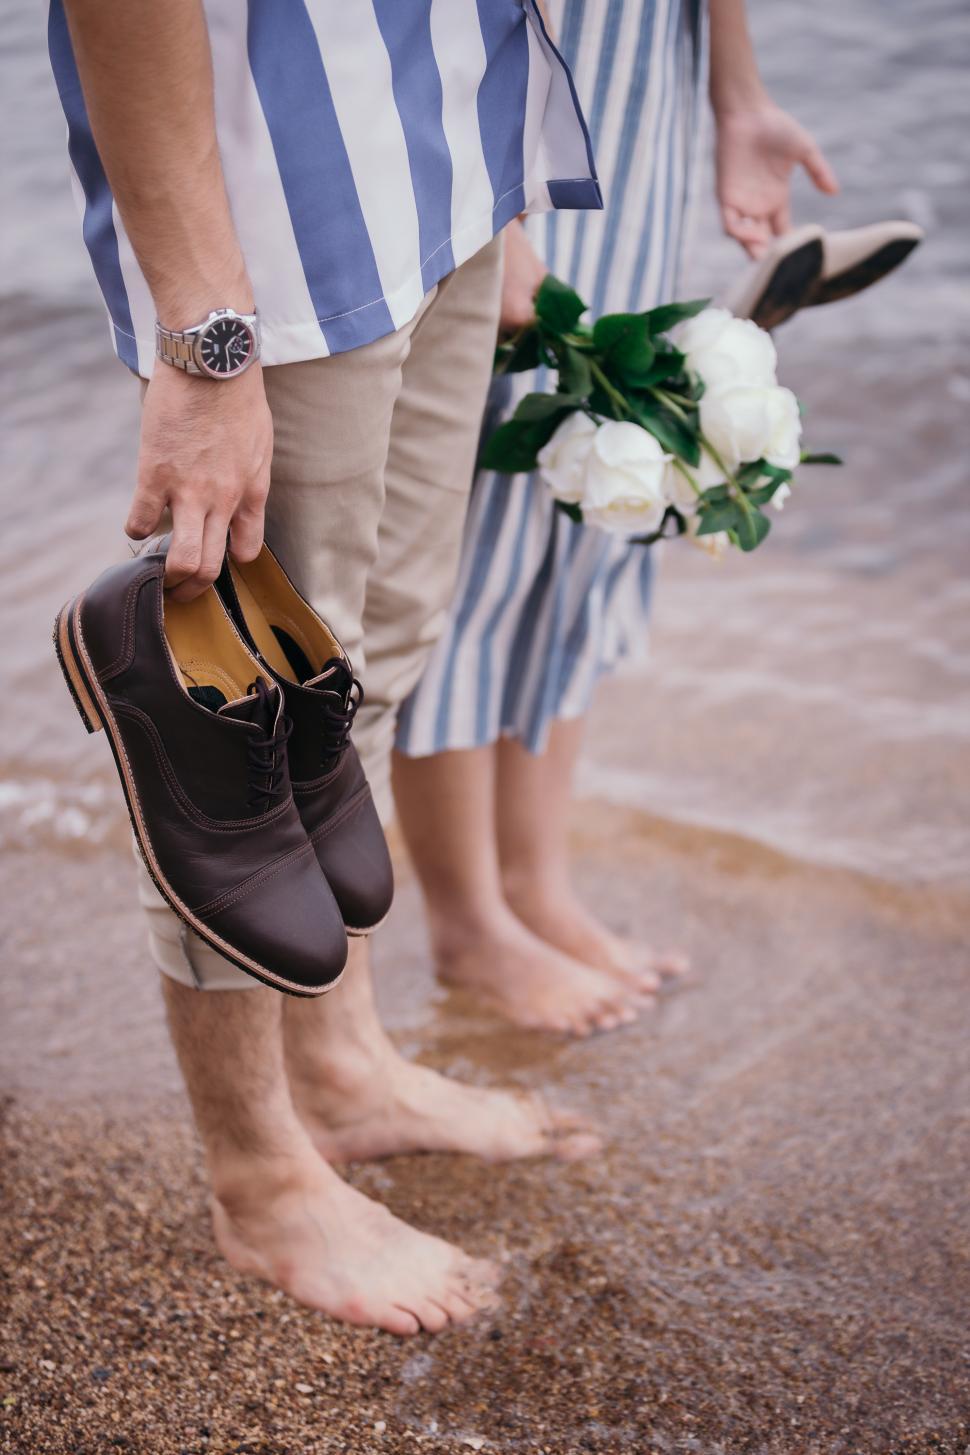 Free Image of Close-up photos of a bouquet of flowers and shoes, the groom and bride 